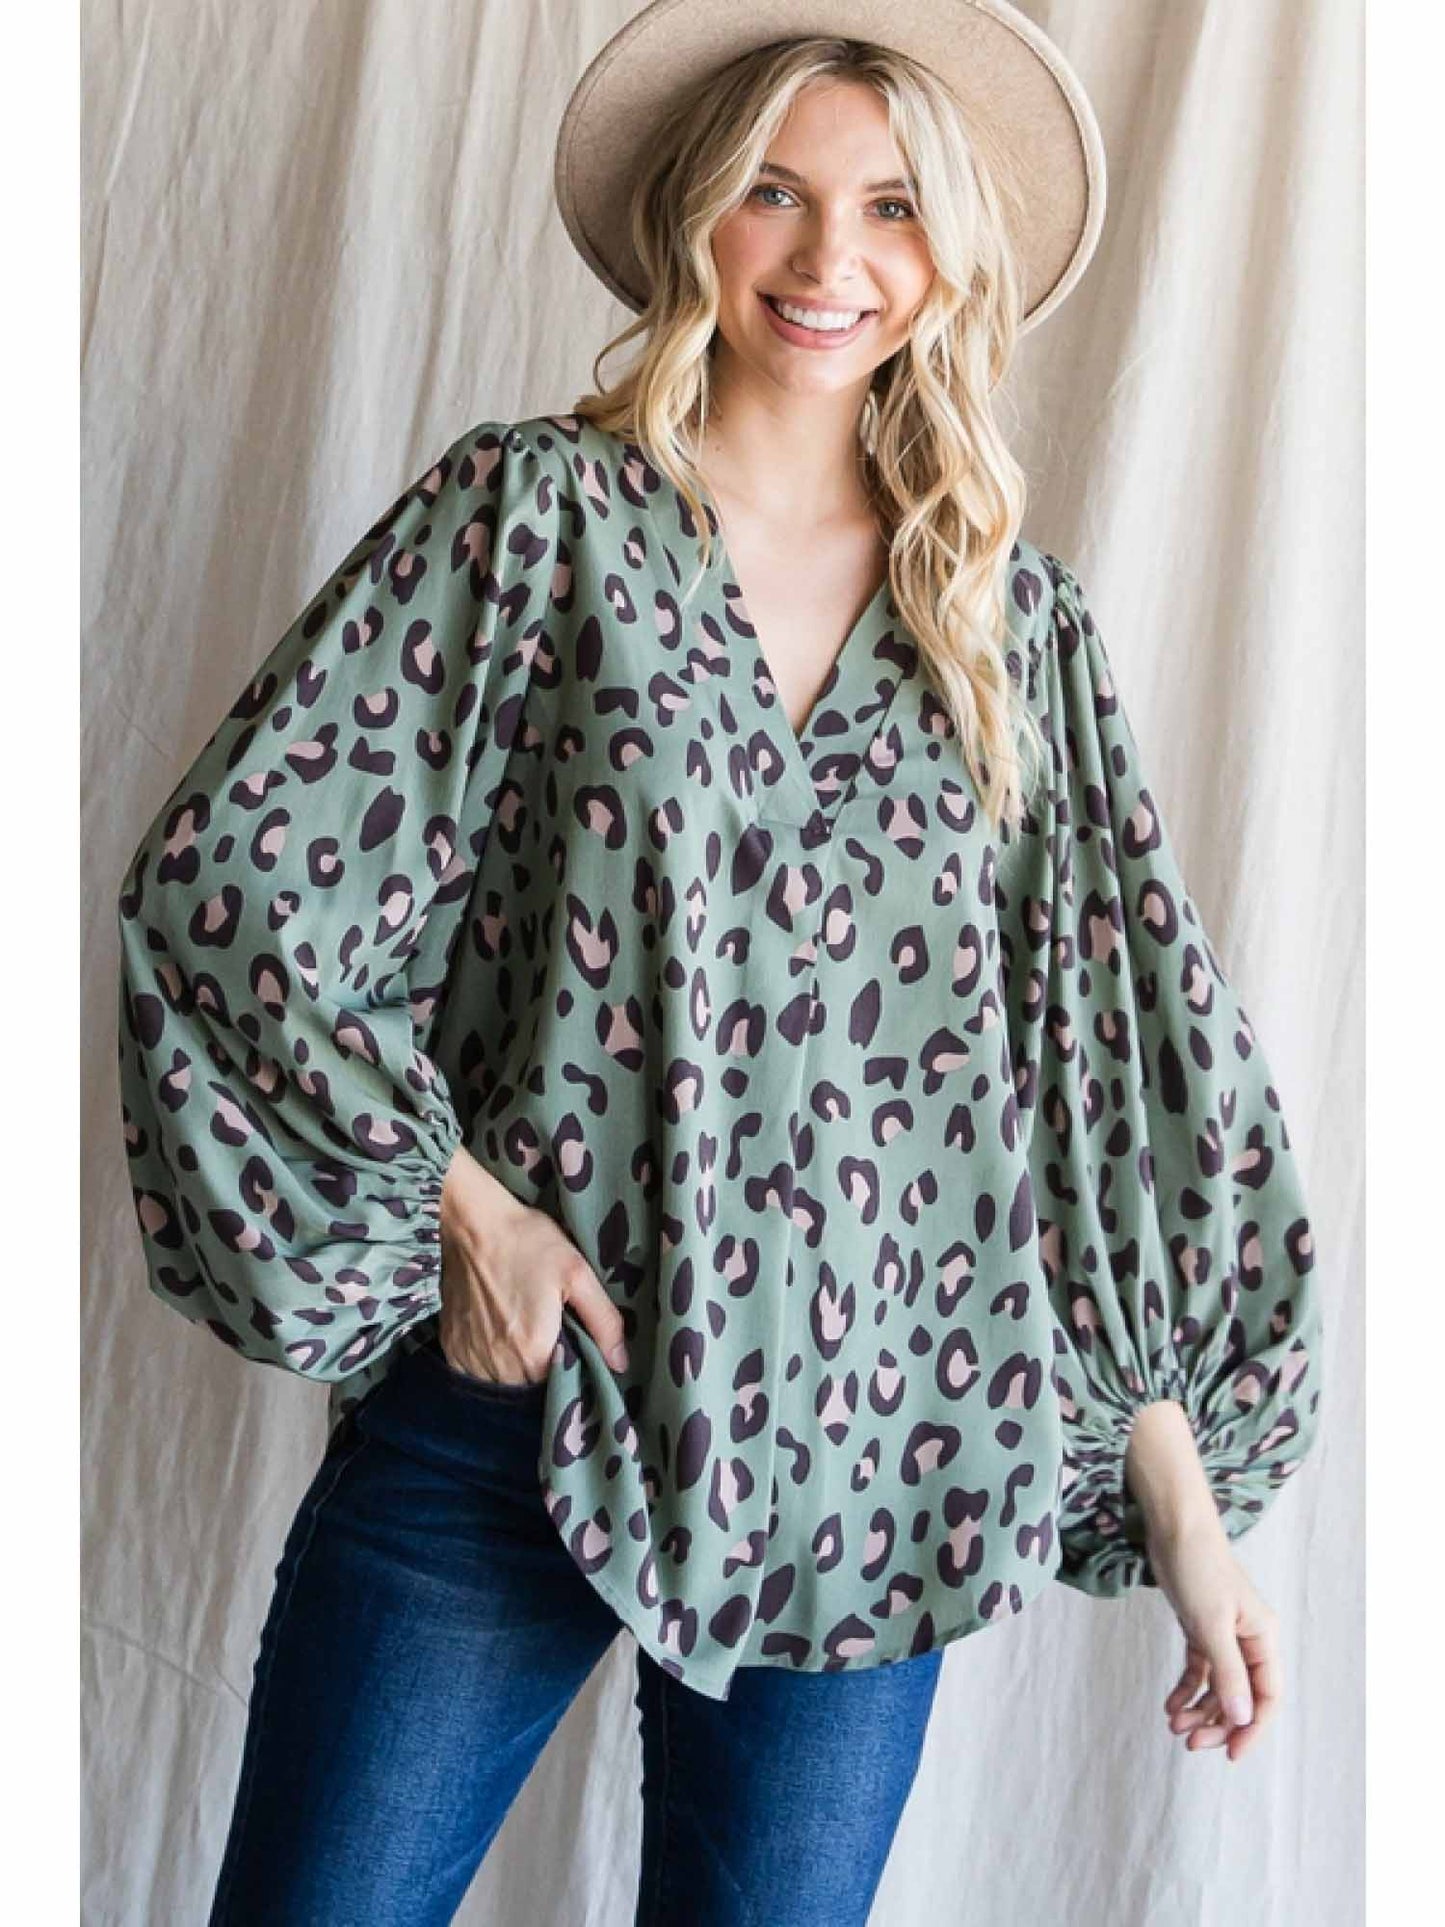 Leopard Print V-Neckline Top with Bubble Sleeves by Jodifl